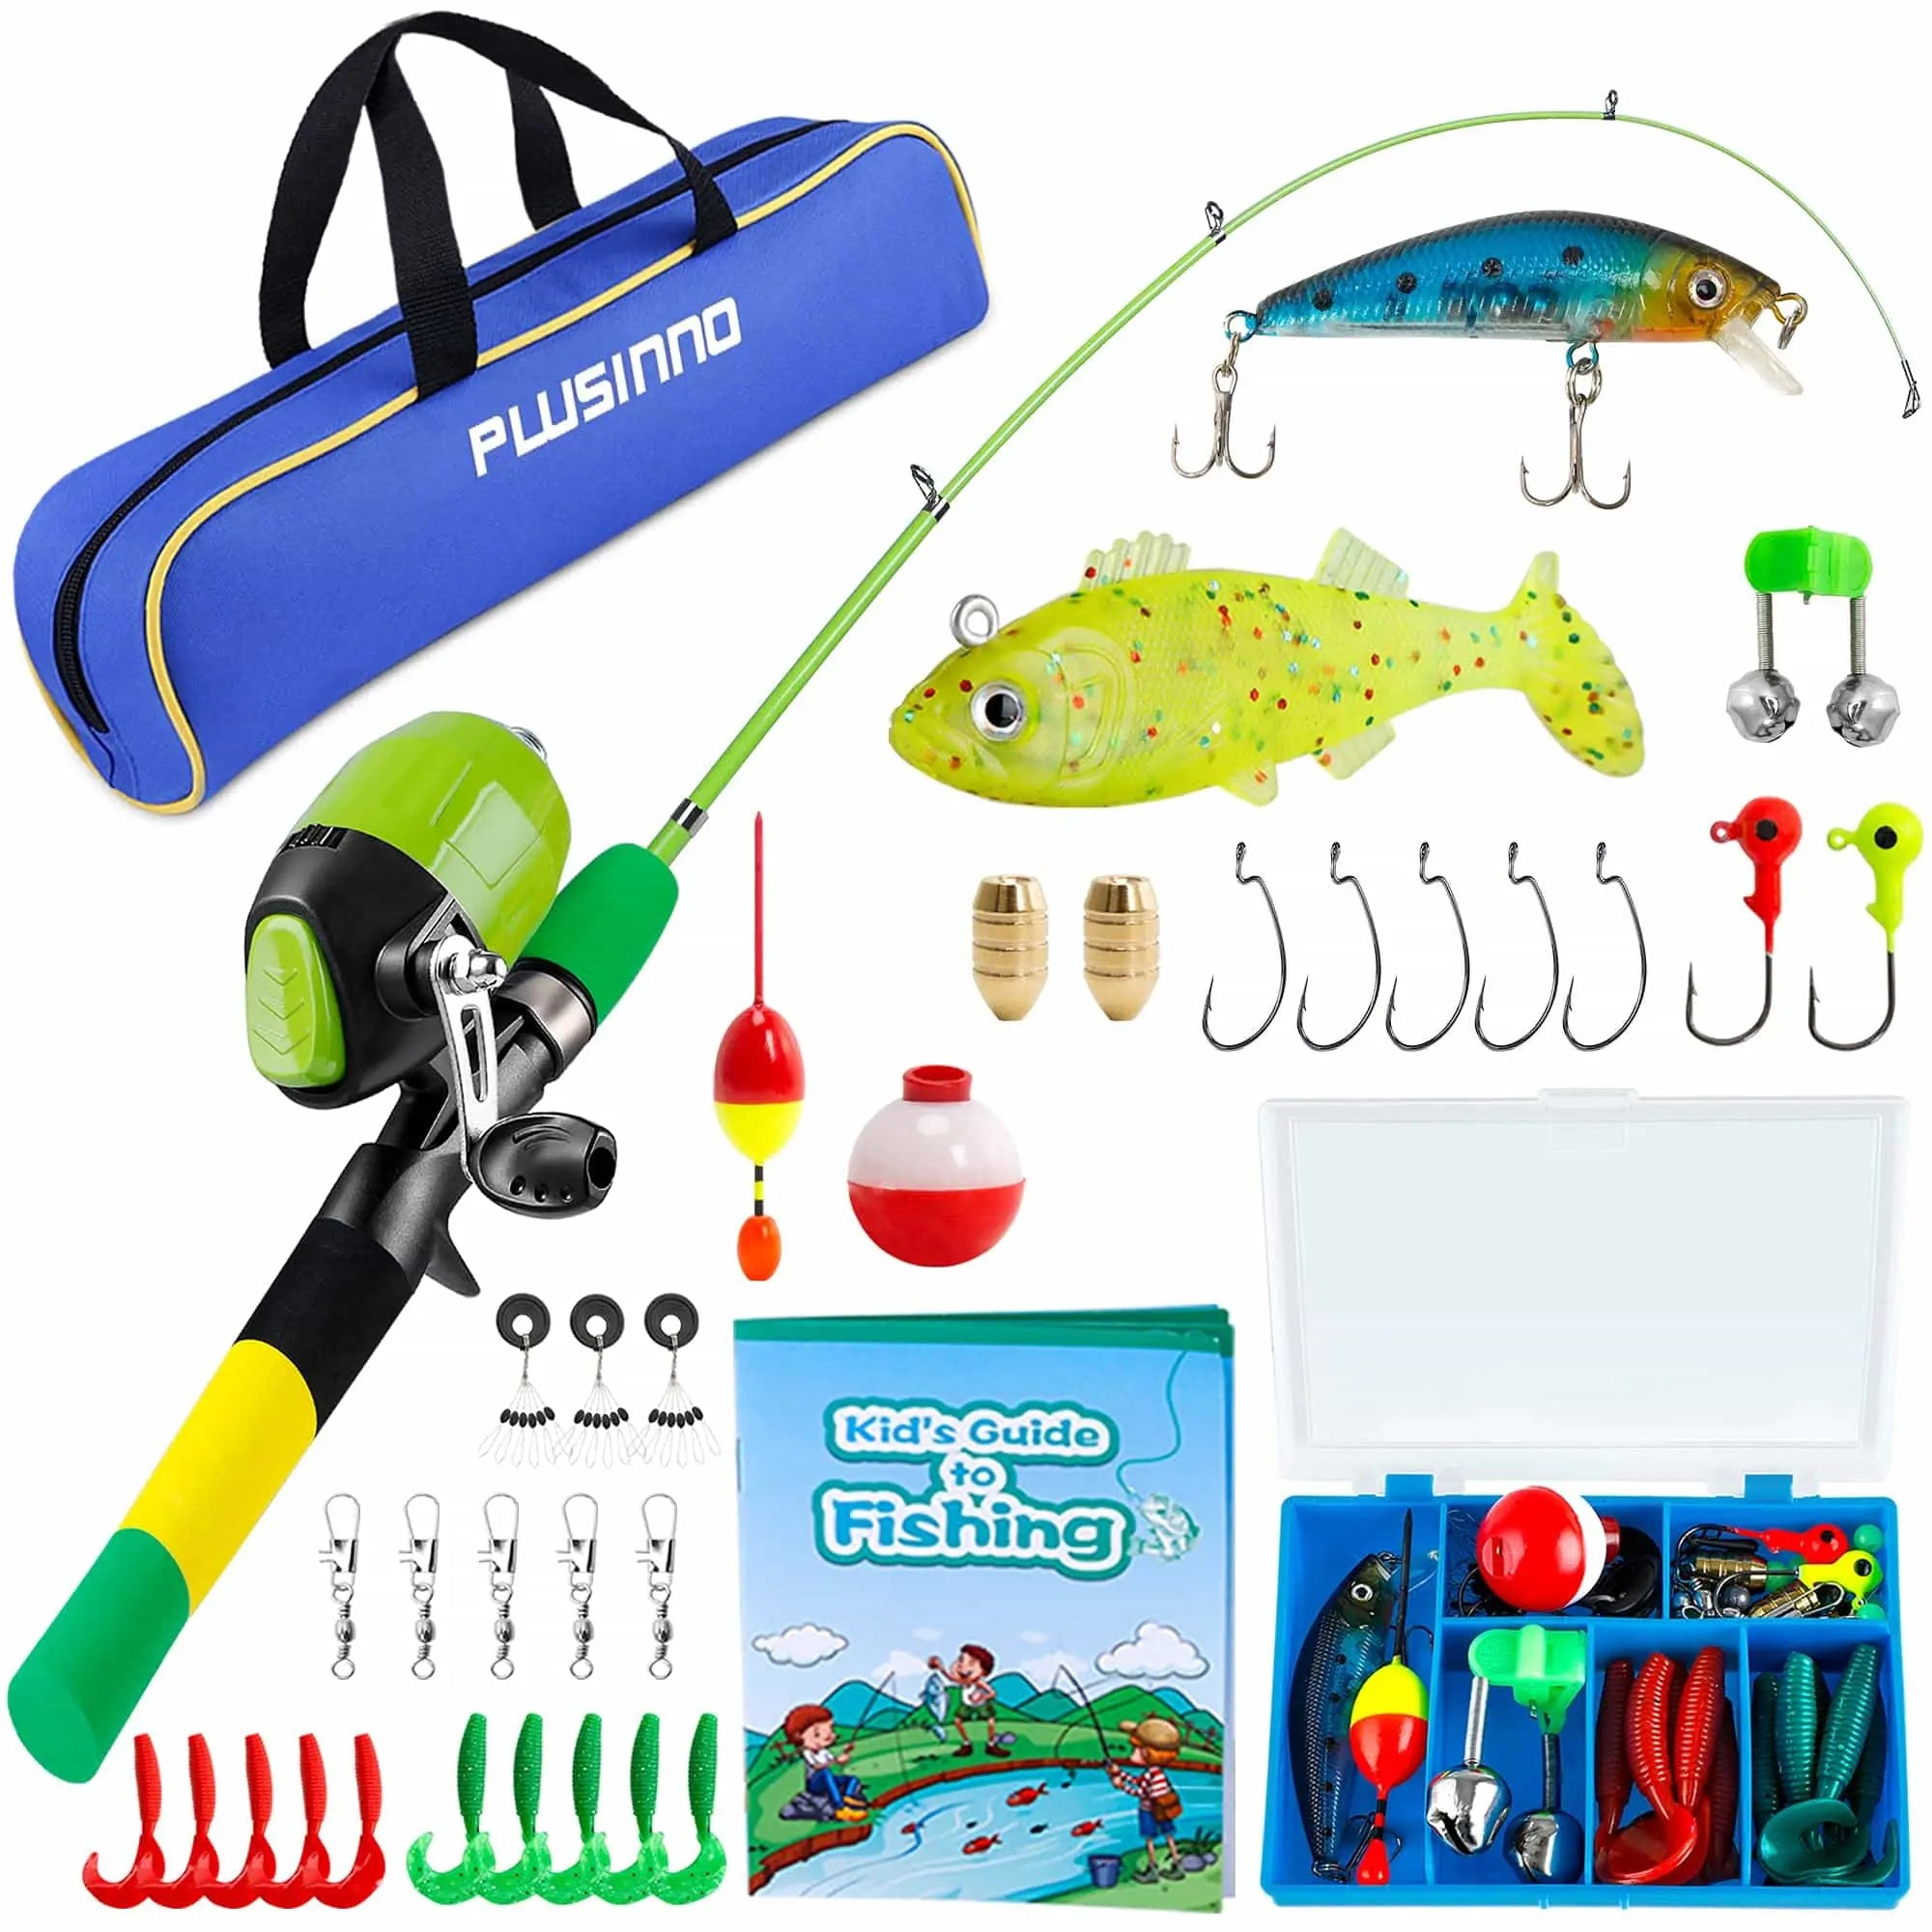 PLUSINNO Rainbow Kids Fishing and Reel Combos Full Kit without Net